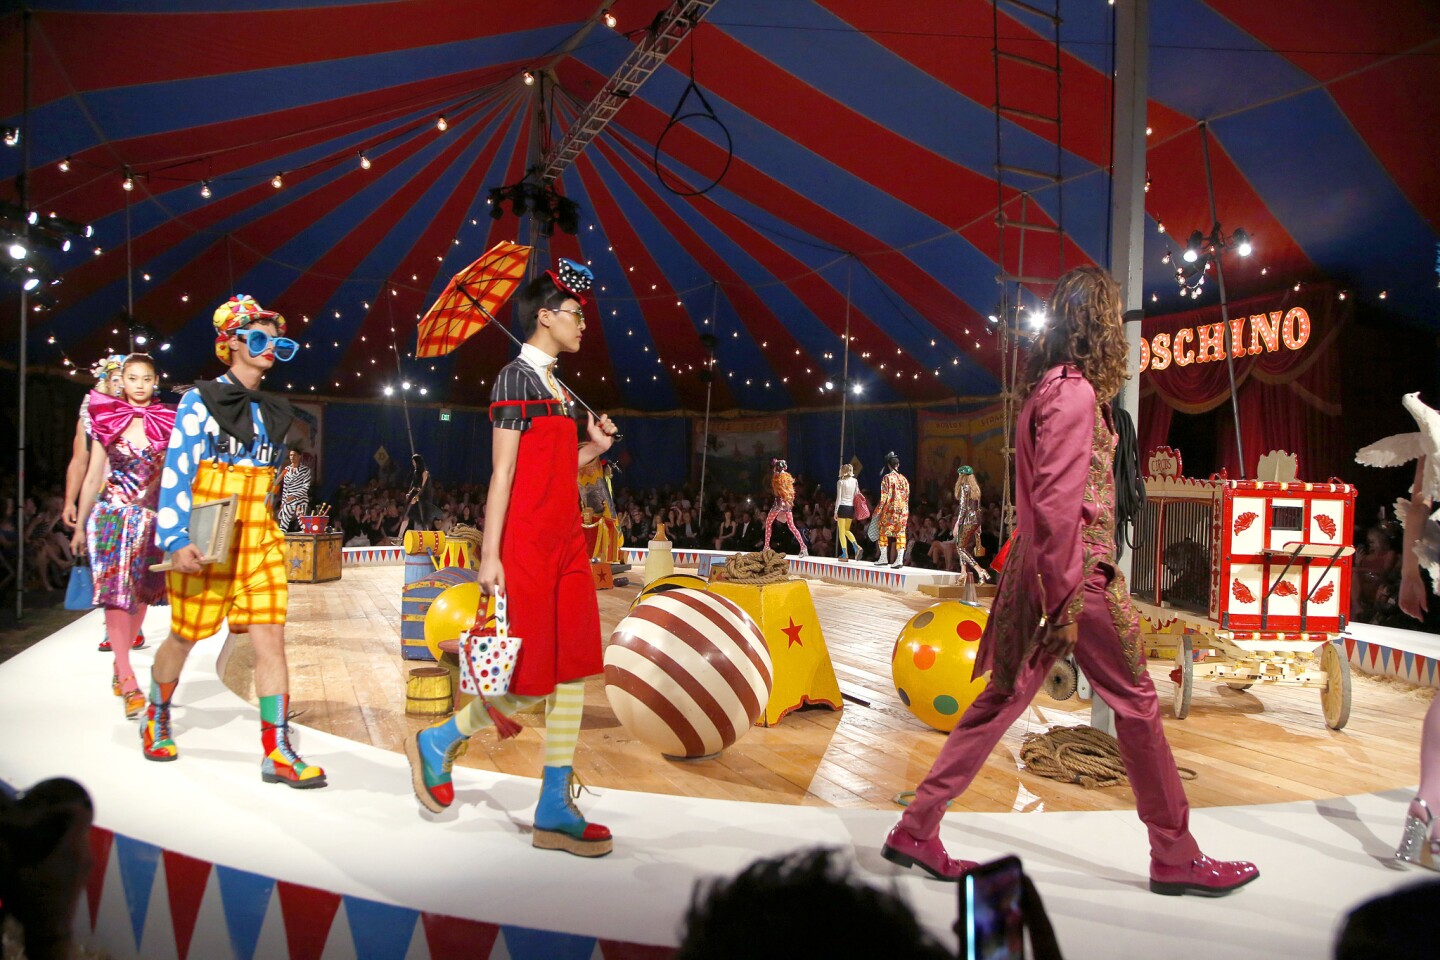 The finale of Moschino's circus-themed runway show presented on June 8, 2018, at the L.A. Equestrian Center in Burbank, the third time creative director Jeremy Scott has presented the collections together in Southern California.